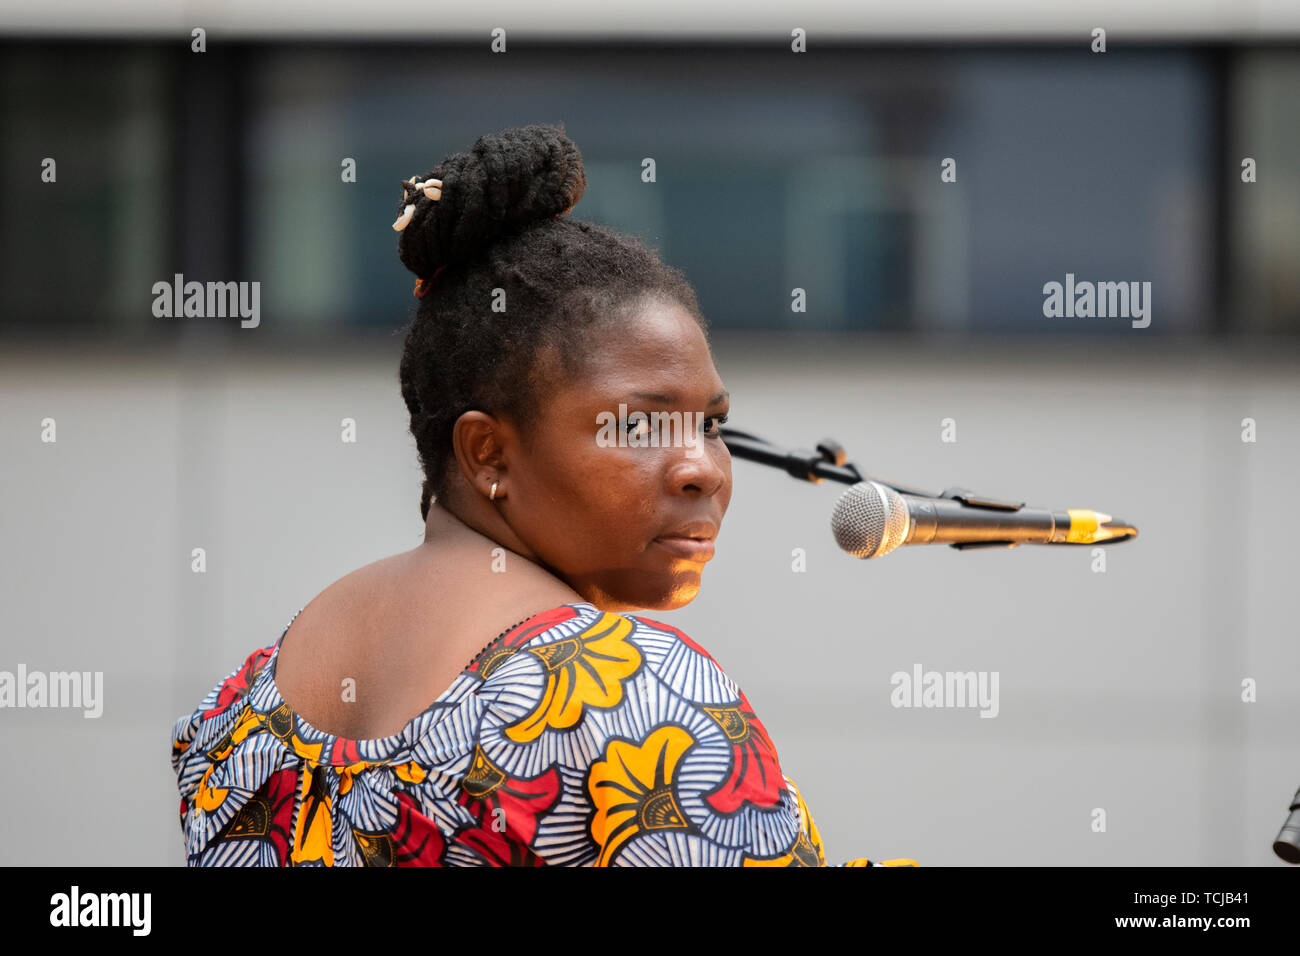 Tolinga At The Rehearsals Of The Not Another Diva Show At The Holland Festival Amsterdam The Netherlands 2019 Stock Photo - Alamy